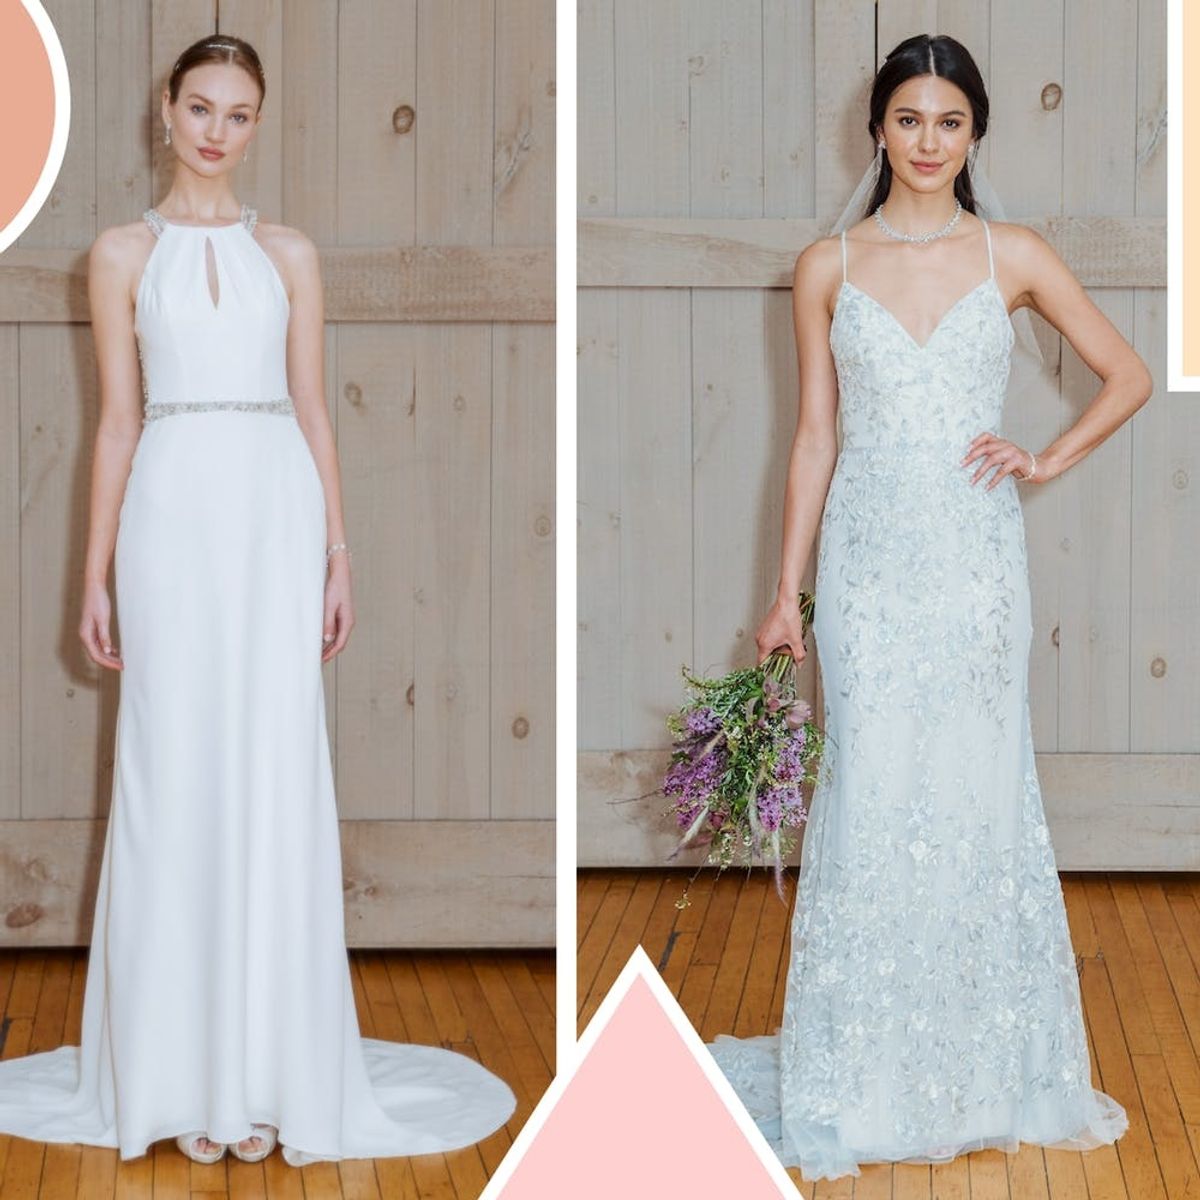 Our Top Under-$1500 Picks from David’s Bridal’s Fall 2017 Collection